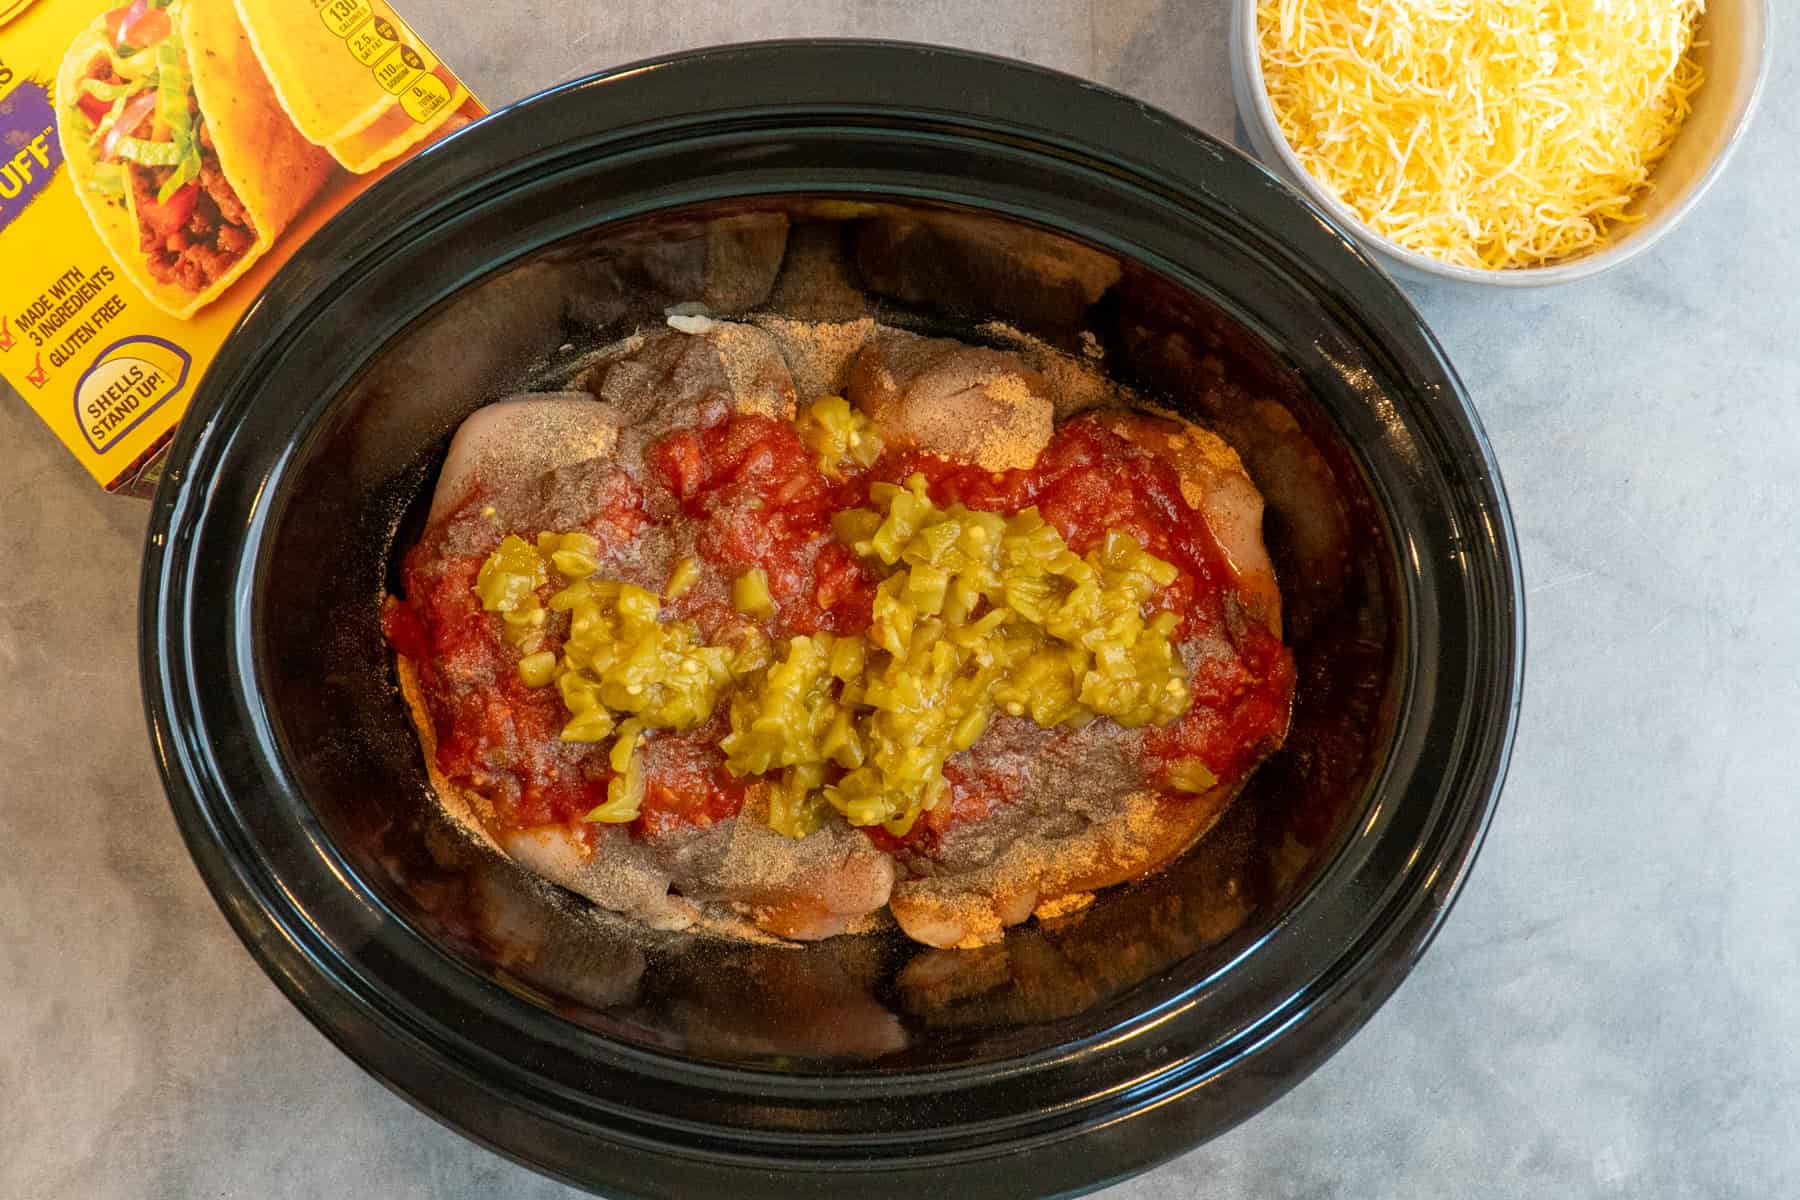 Overhead look at chicken, spices, salsa, and green chilies in a crock pot.